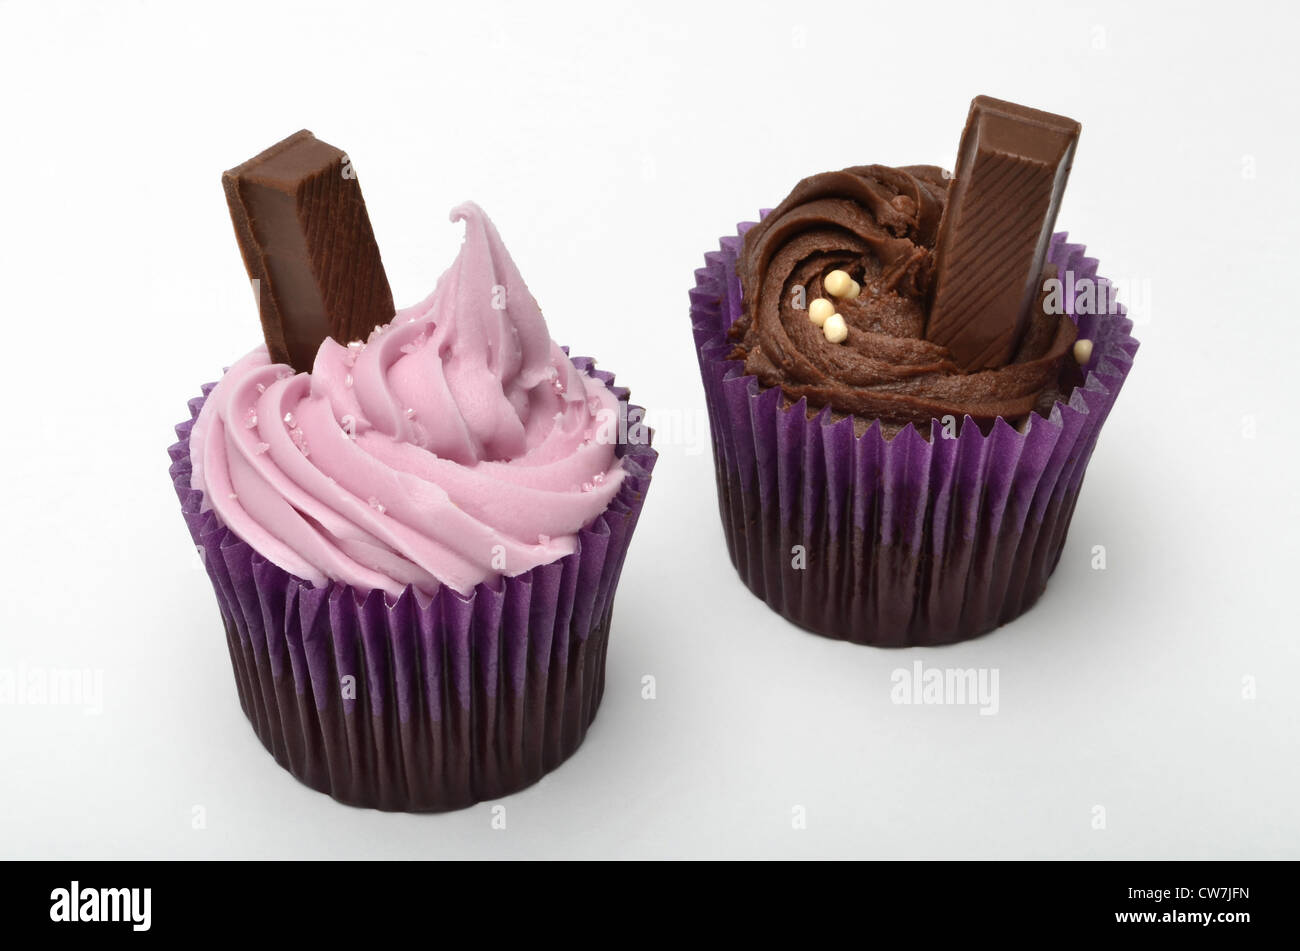 Cupcakes on a white background Stock Photo